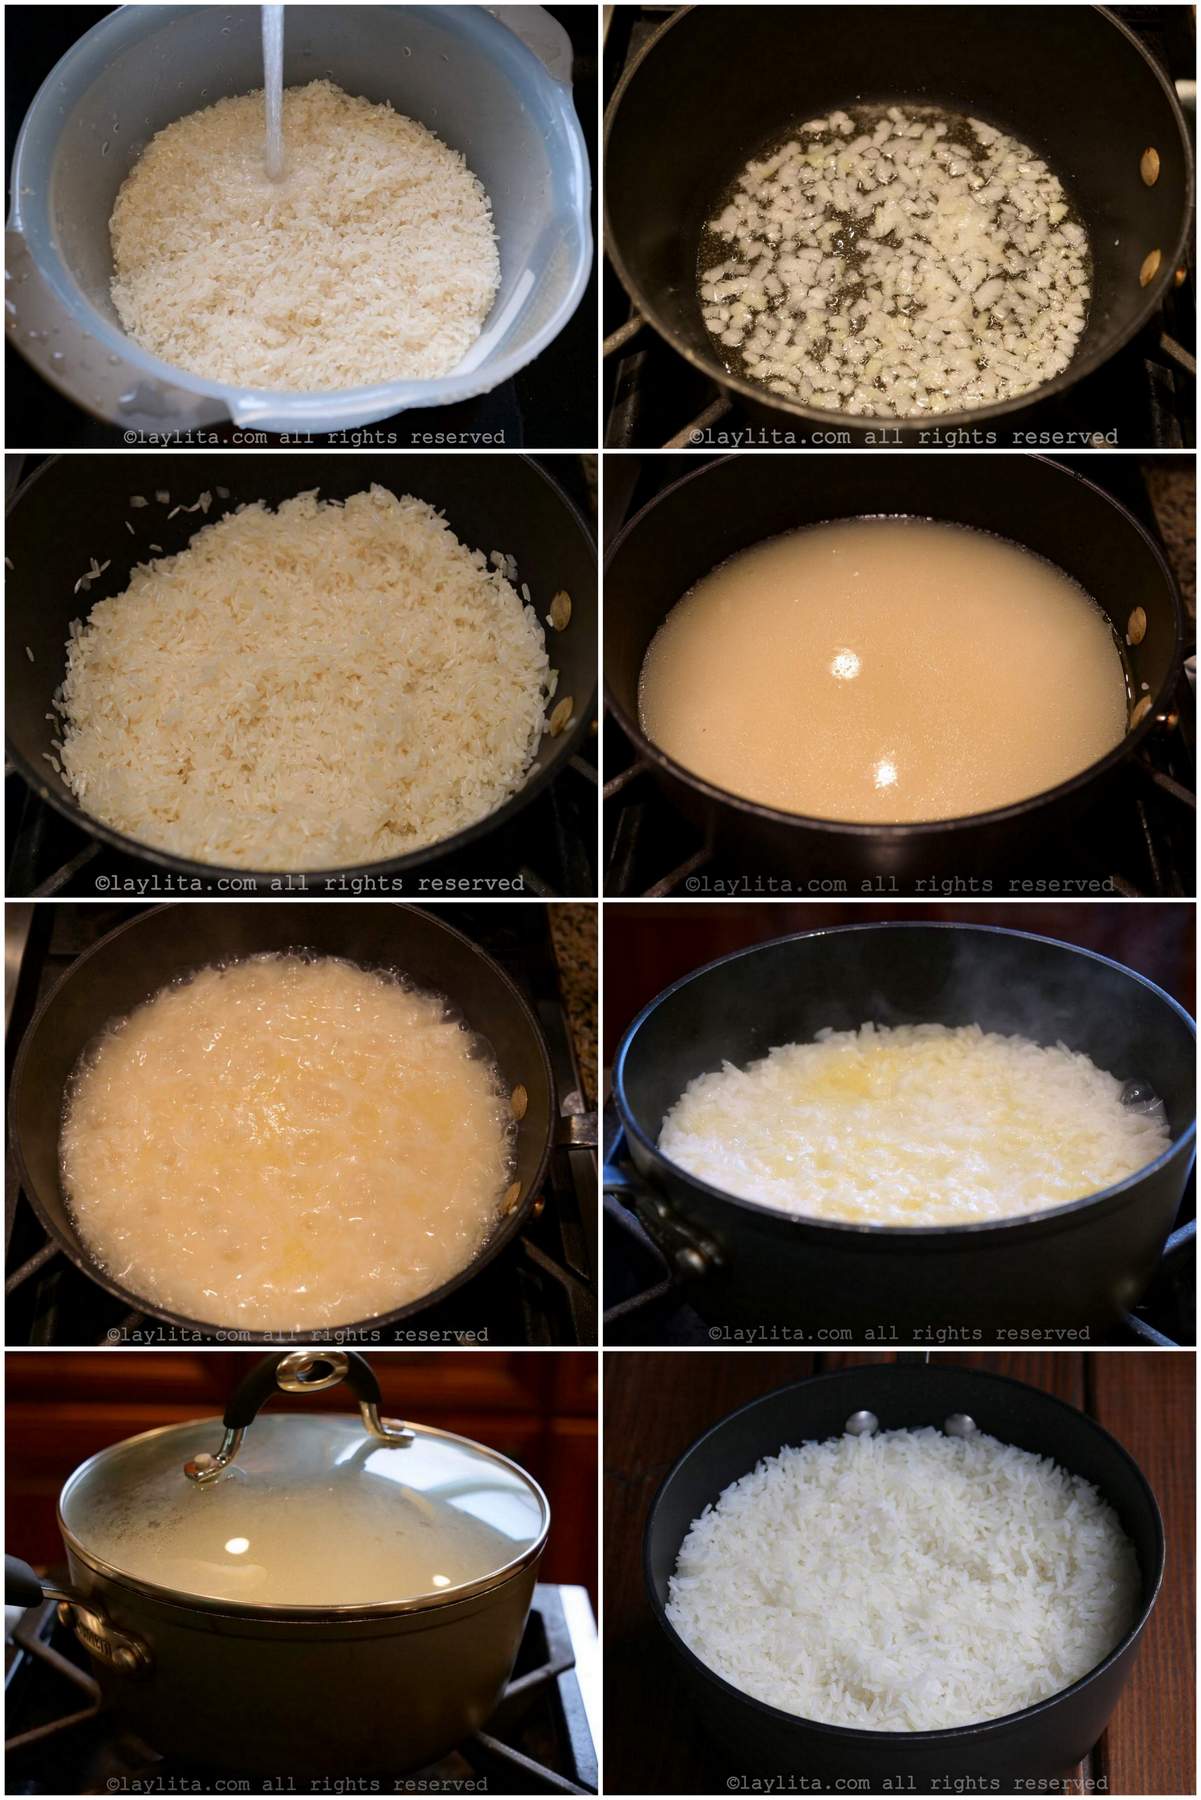 Step by step preparation photos for Ecuadorian and Latin style white rice